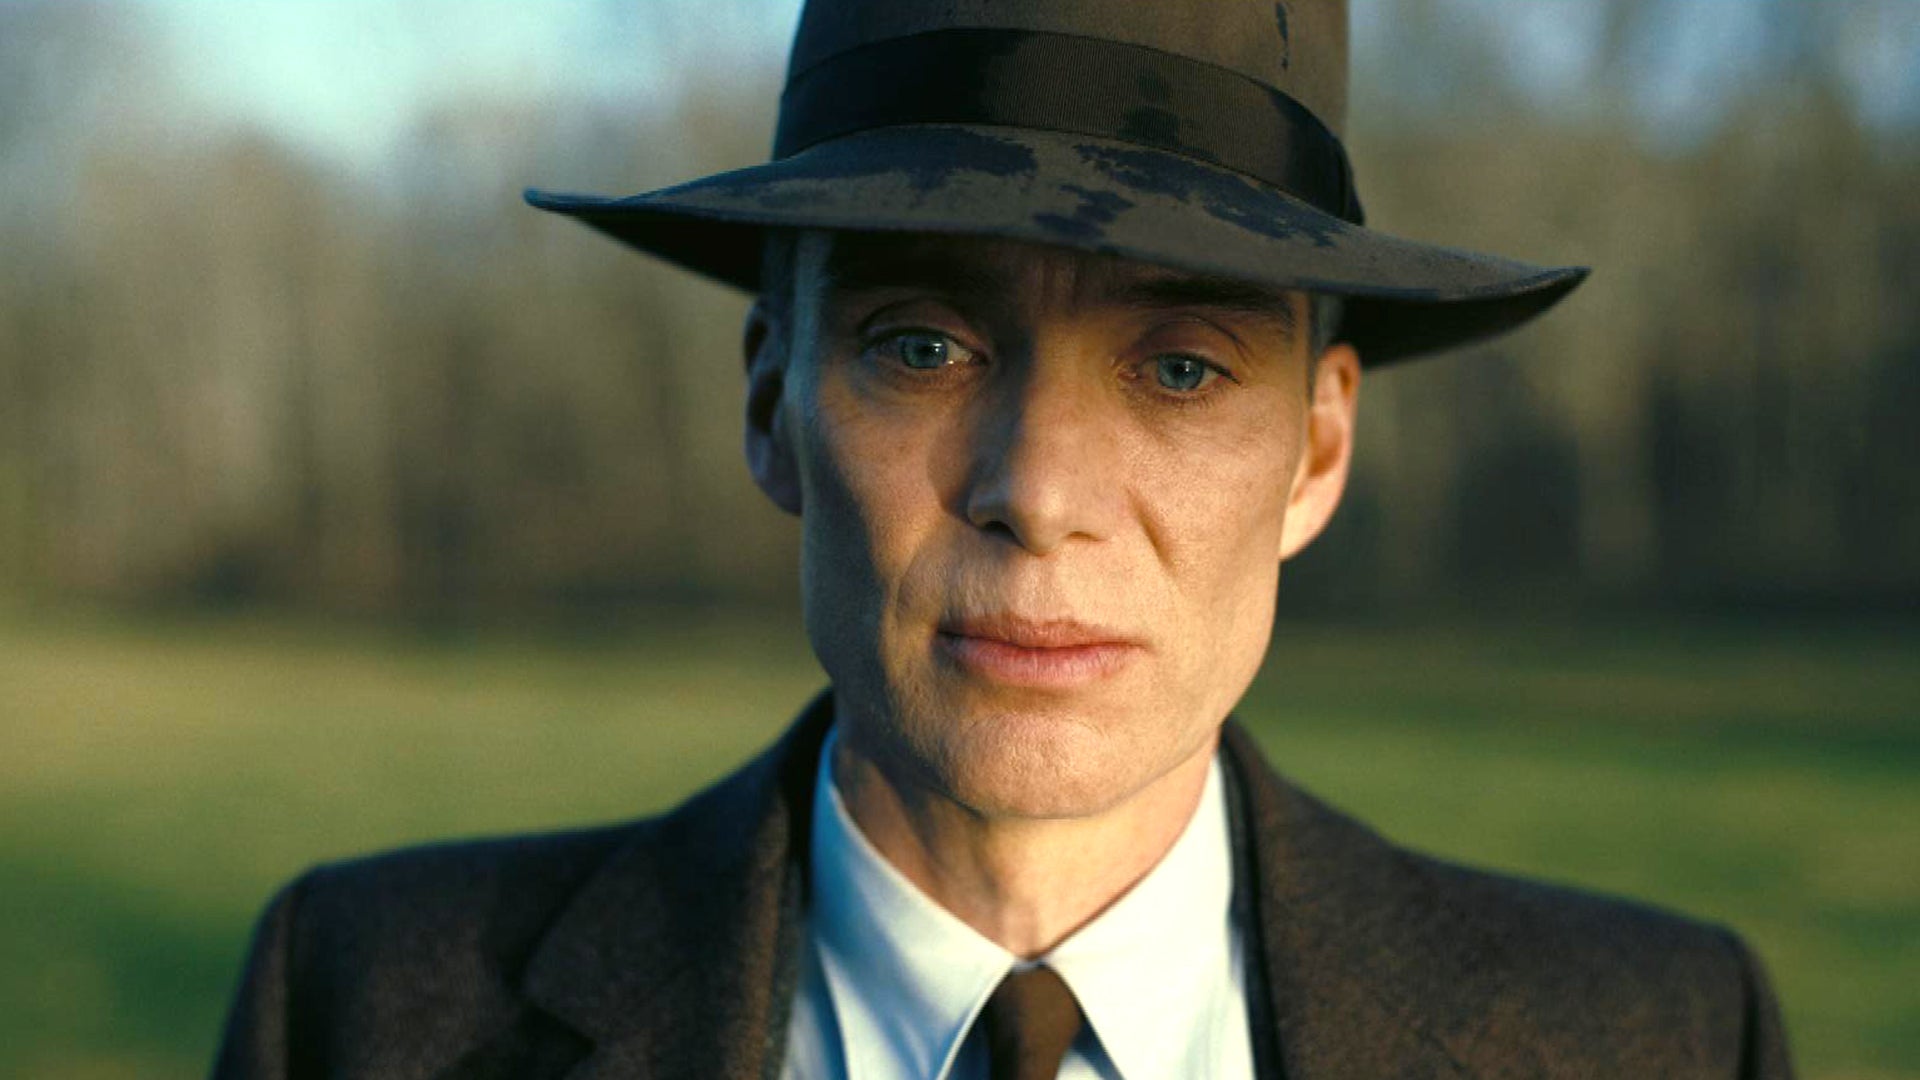 Oppenheimer star Cillian Murphy reacts to doppelgänger claim with